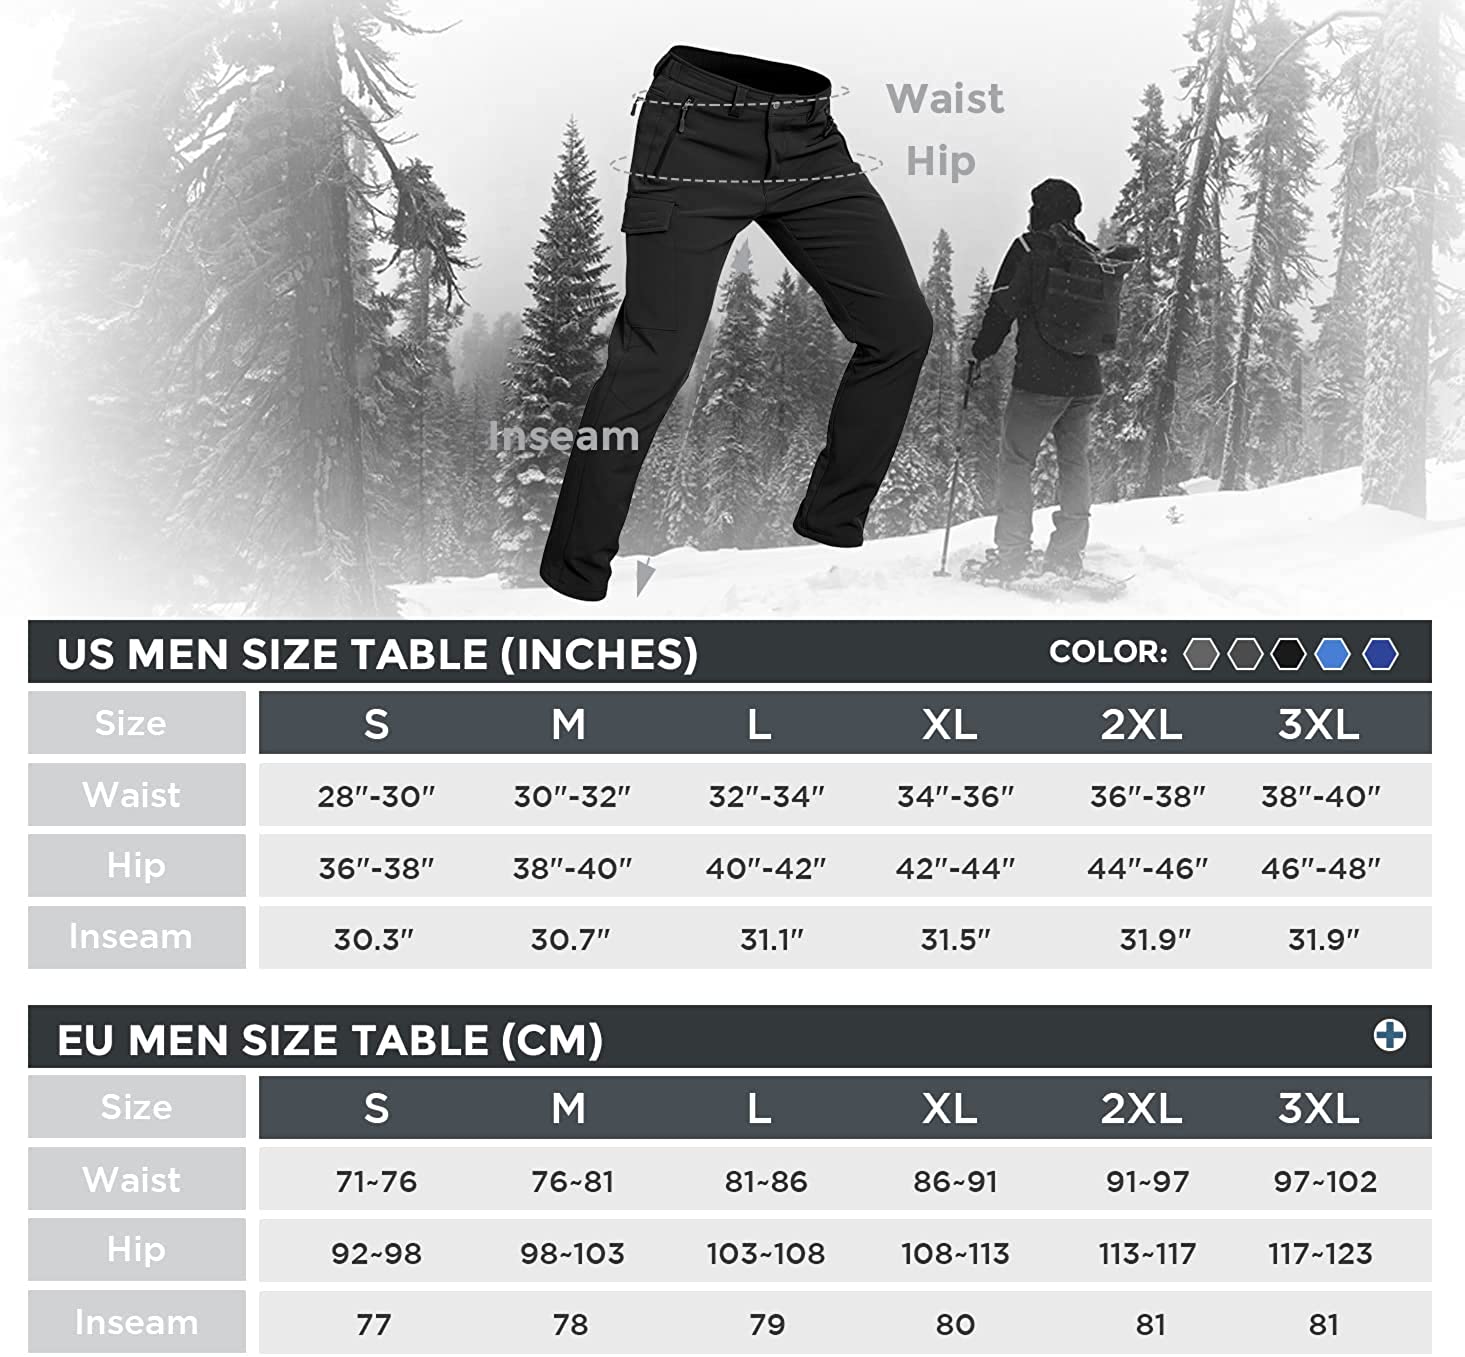  Fleece Lined Leggings Womens Winter Water Resistant Thermal  Hiking Pants Running Skiing Tights Cold Weather Gear Navy 2XL